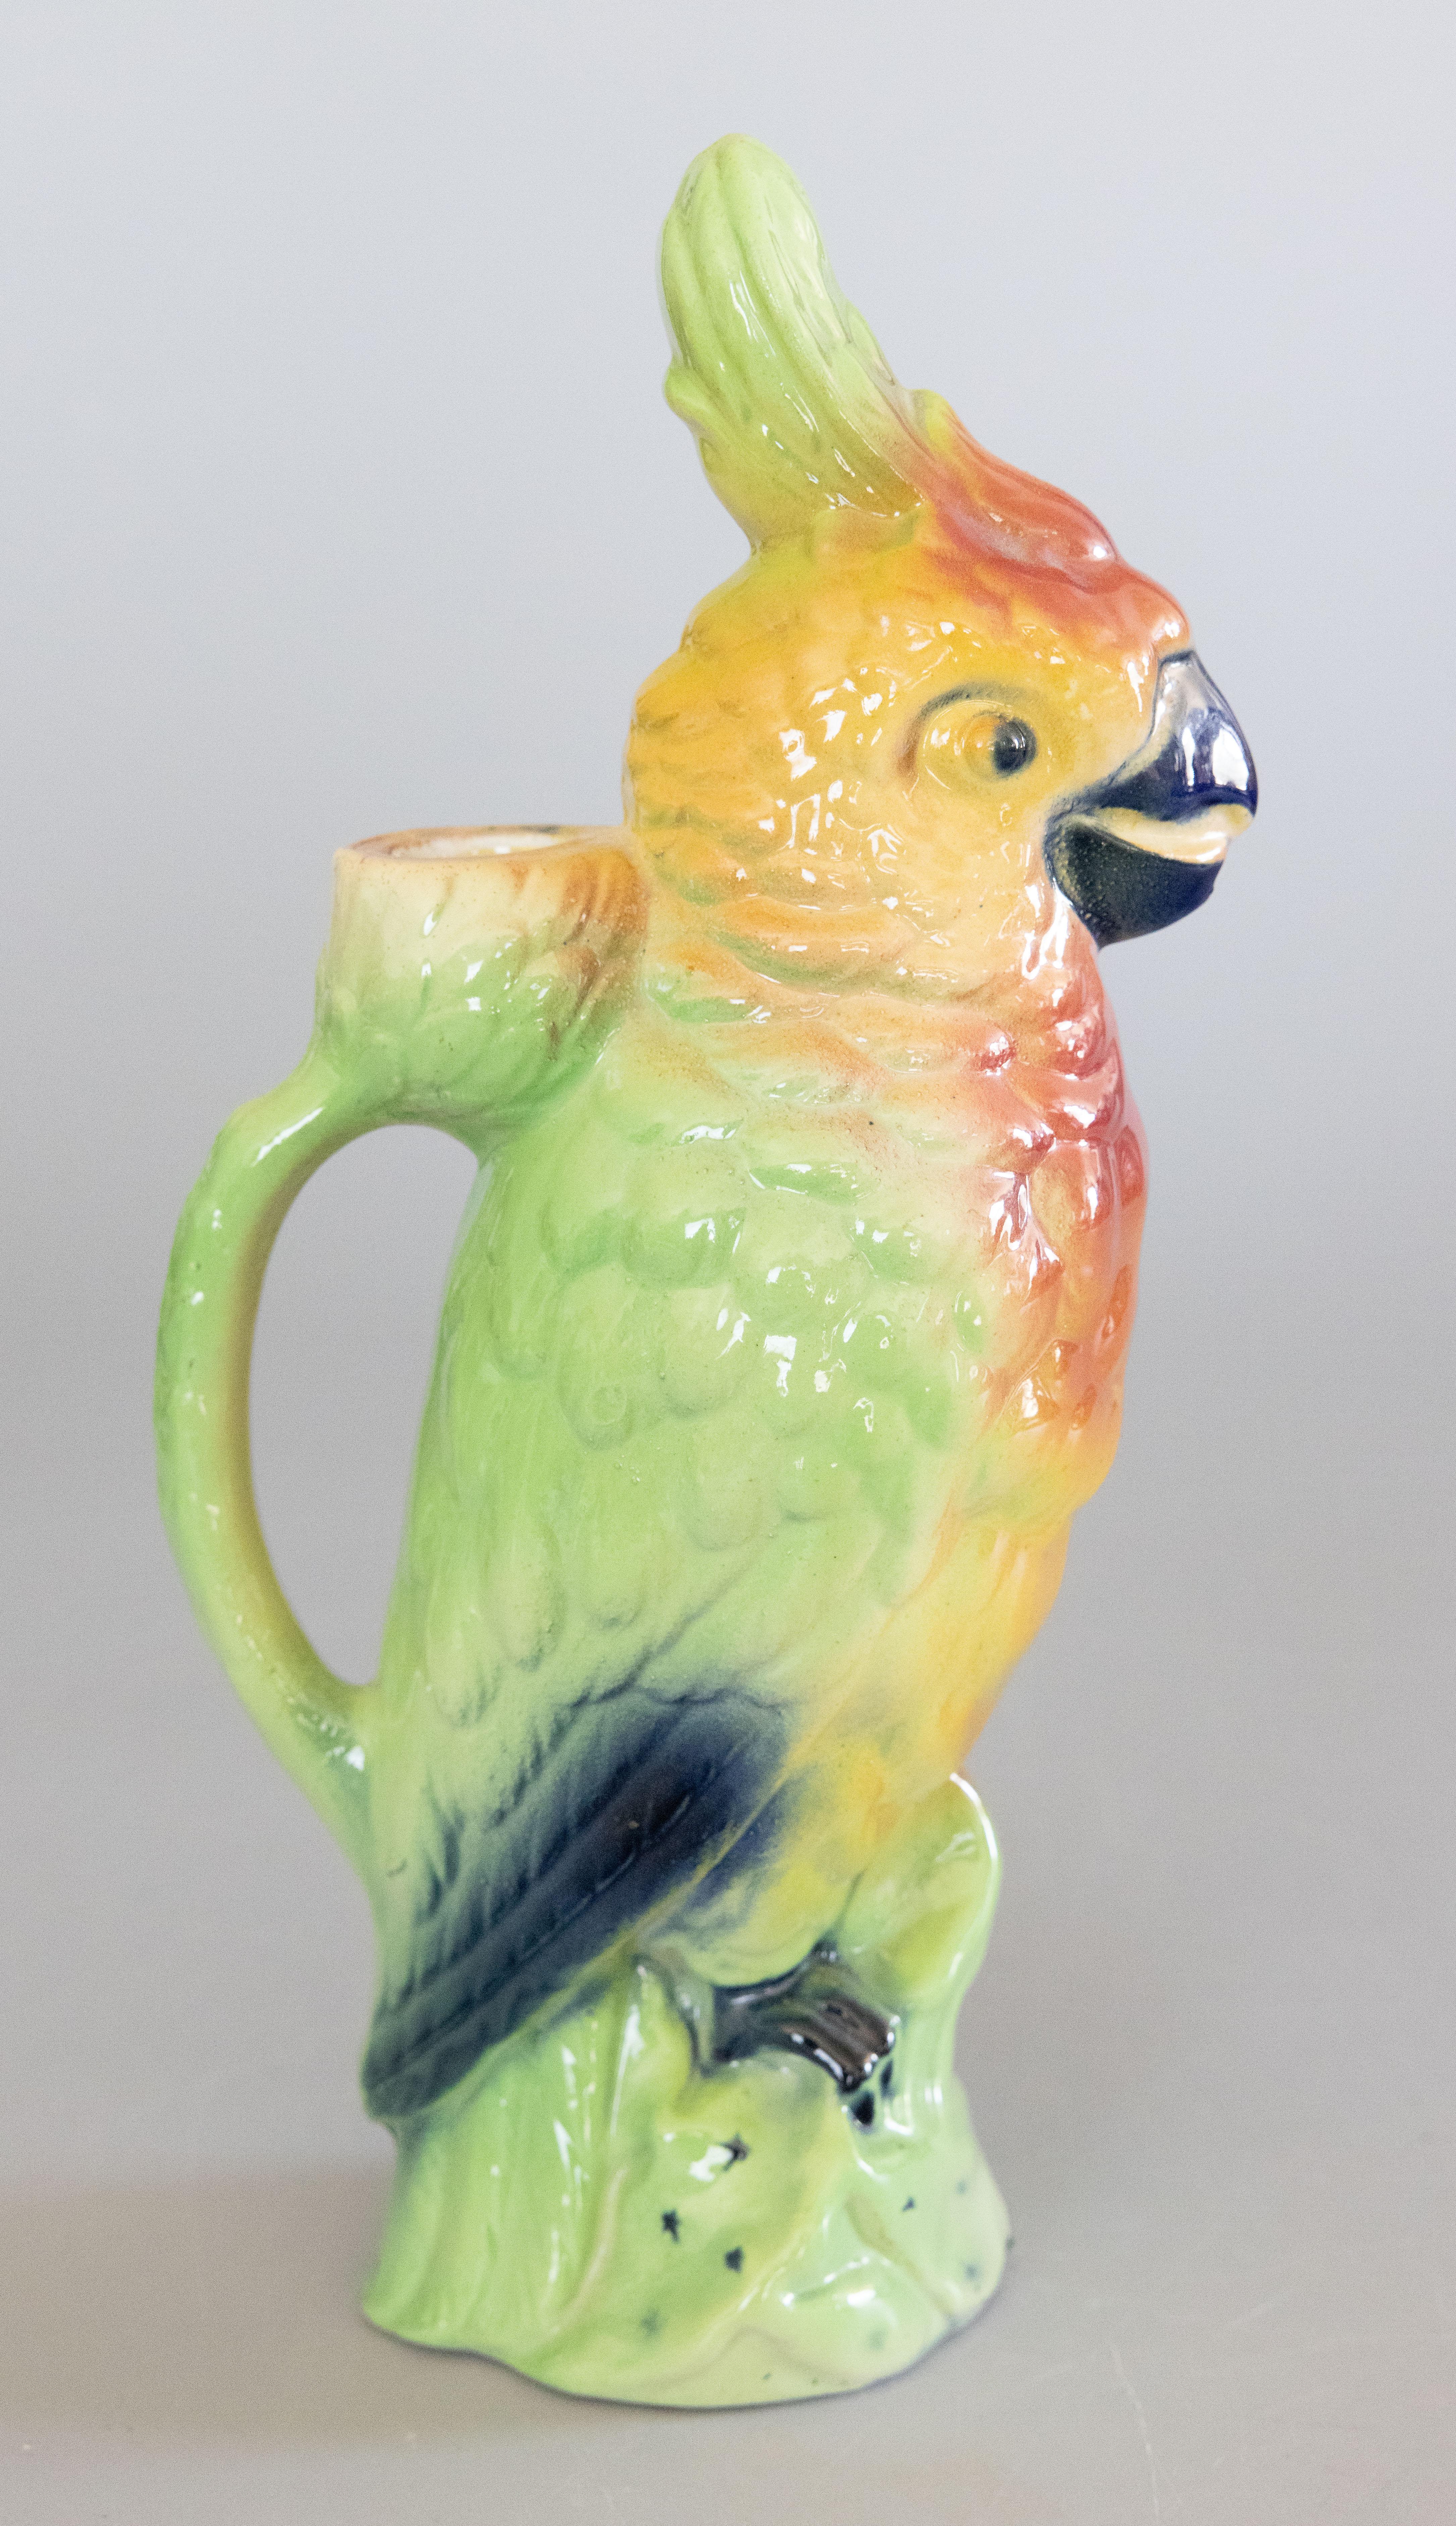 A gorgeous antique French majolica parrot absinthe pitcher decanter or figural jug hand painted with beautiful vibrant colors, circa 1900. This pitcher was made by Keller & Guerin at their St. Clement faience factory in France and is signed on the